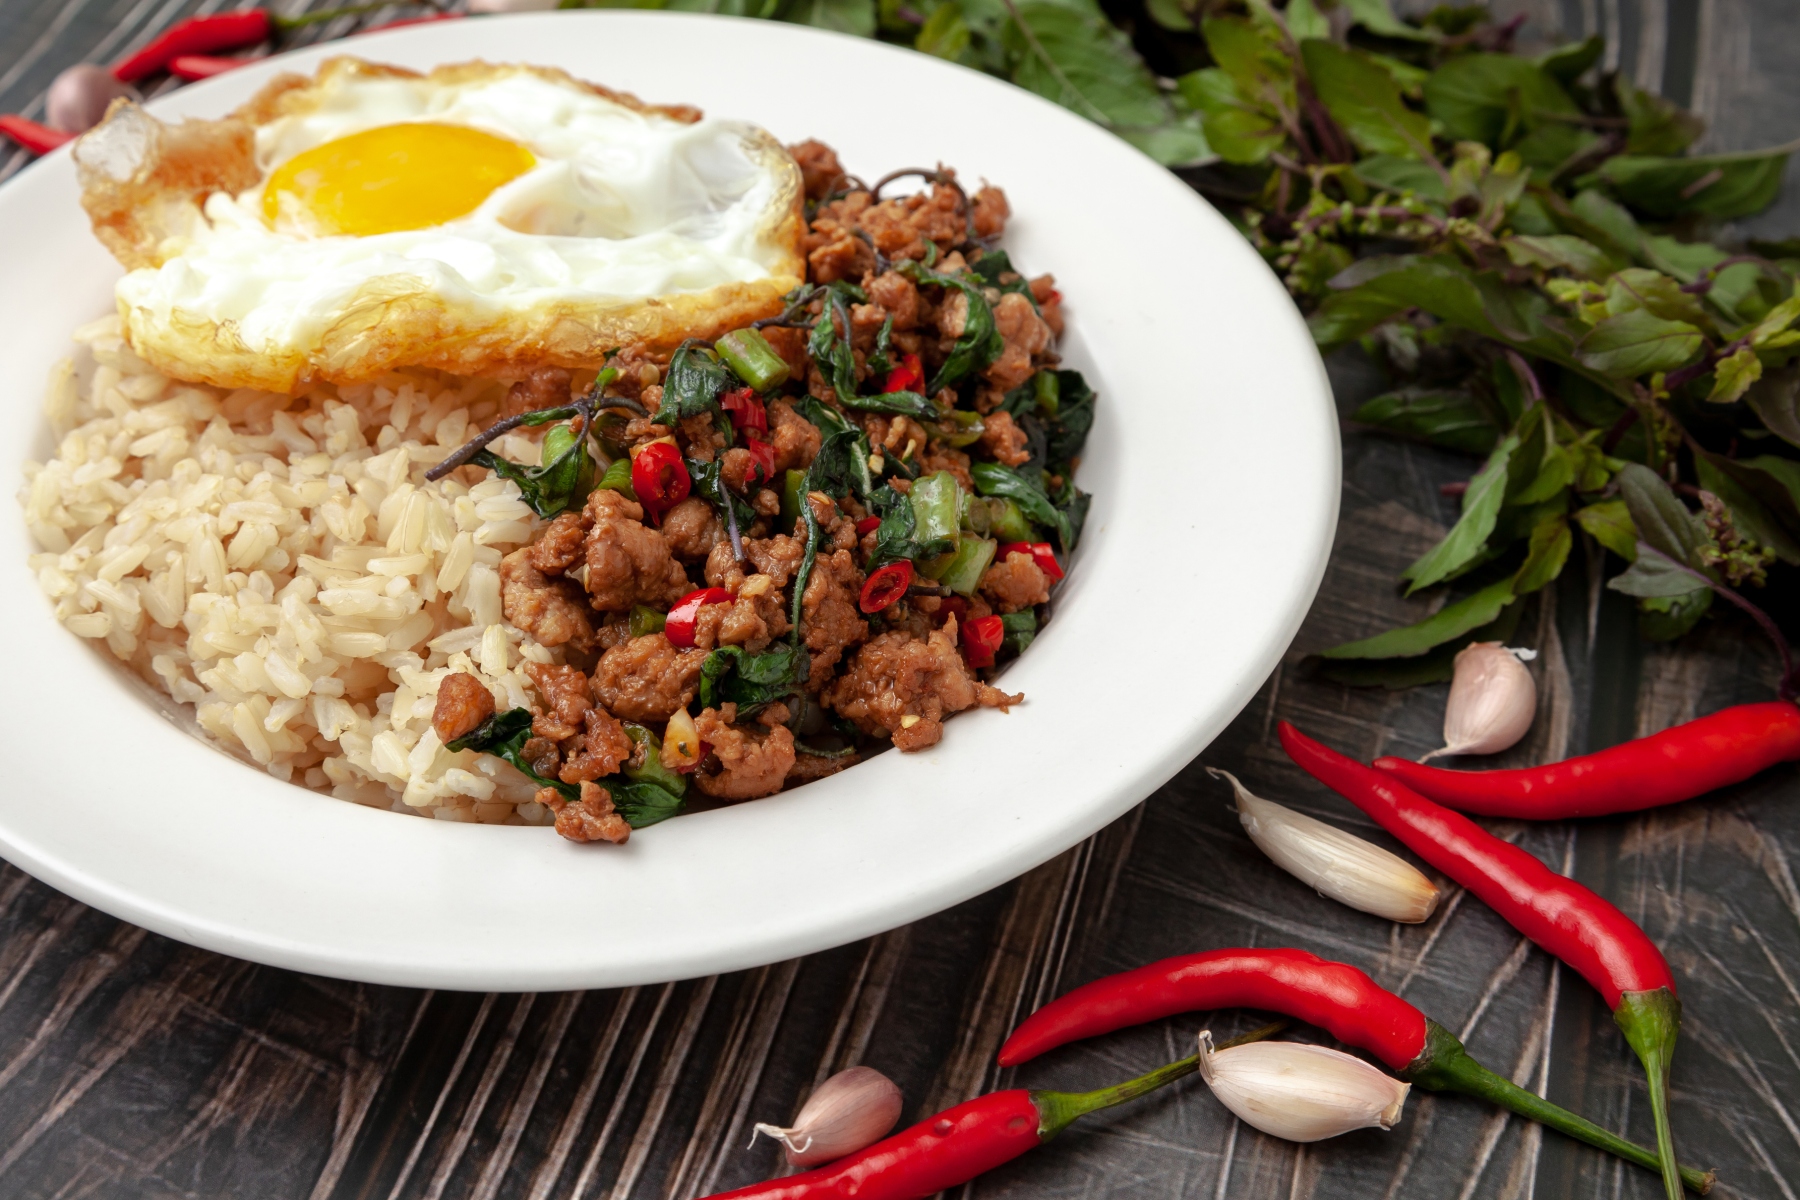 Pad kra pao moo served with a fried egg on top, in a plate alongside chillies and garlic cloves